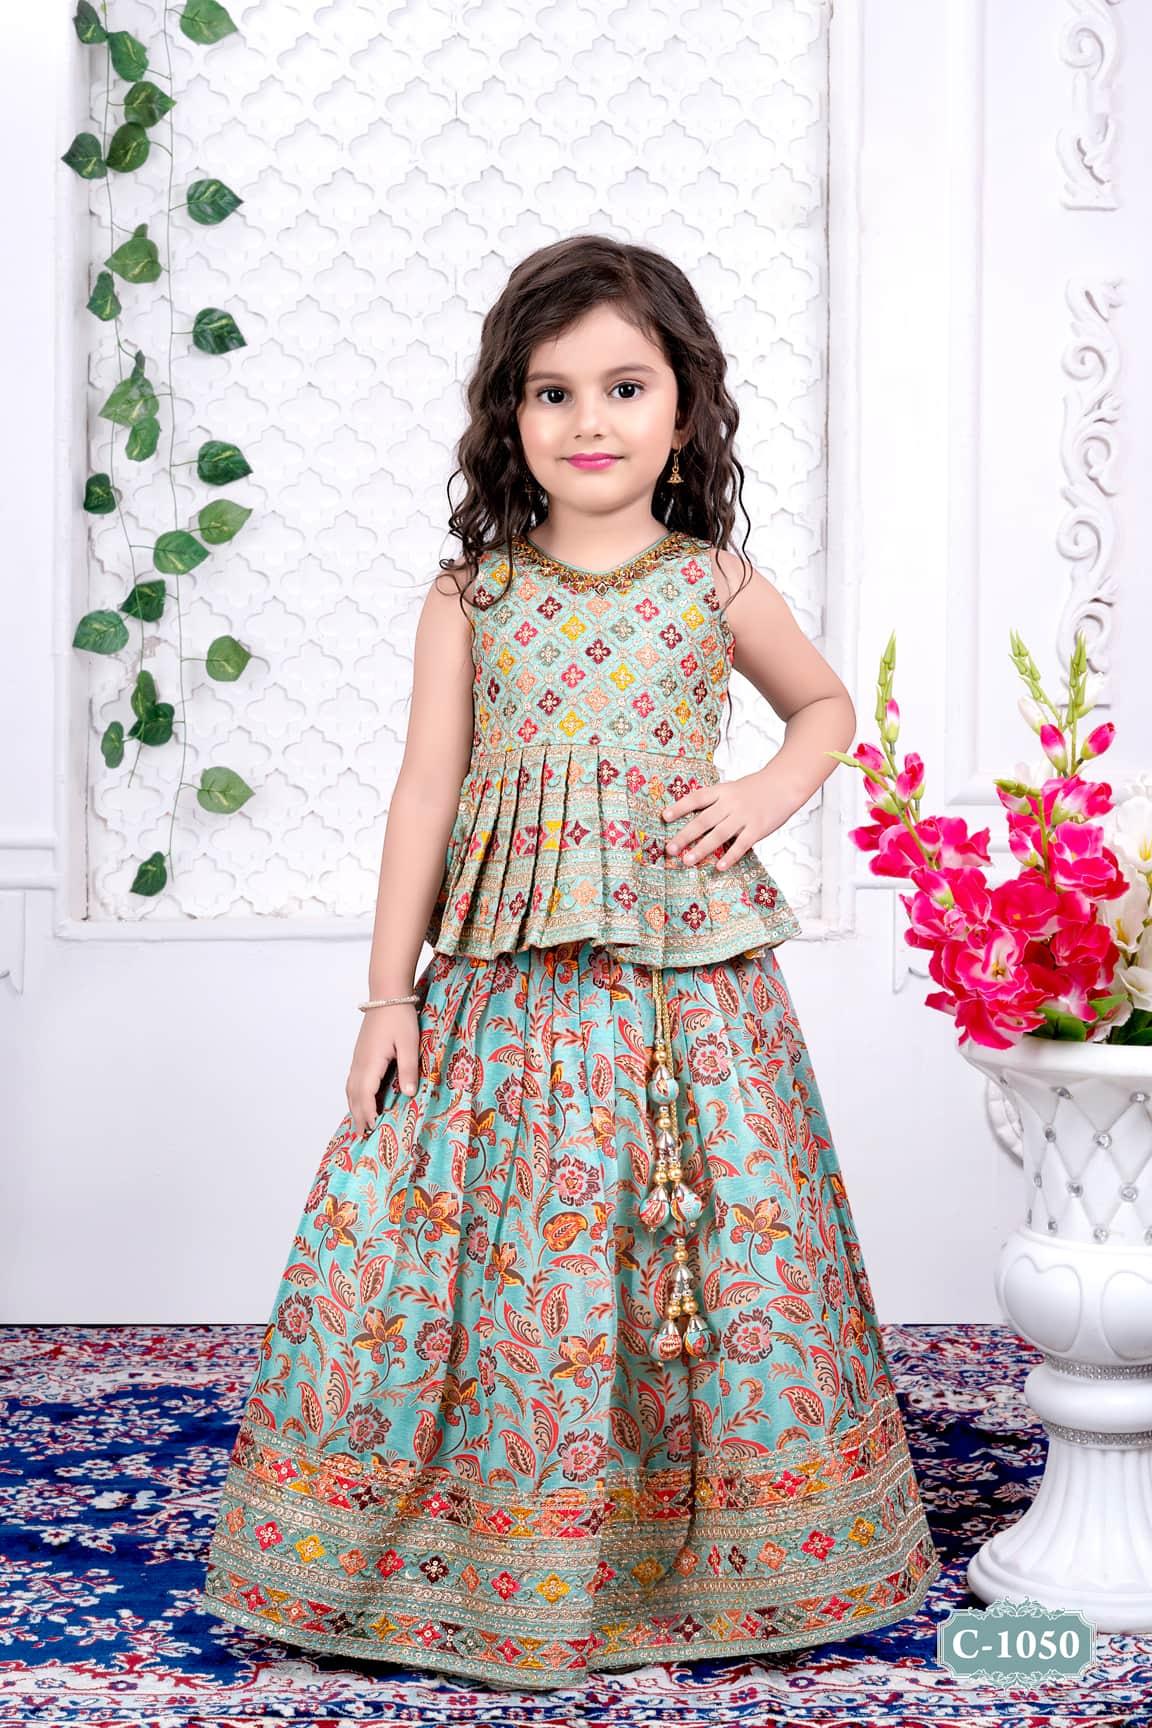 Blue Lehenga with Peplum Top In Exquisite Floral Print For Girls - Lagorii Kids